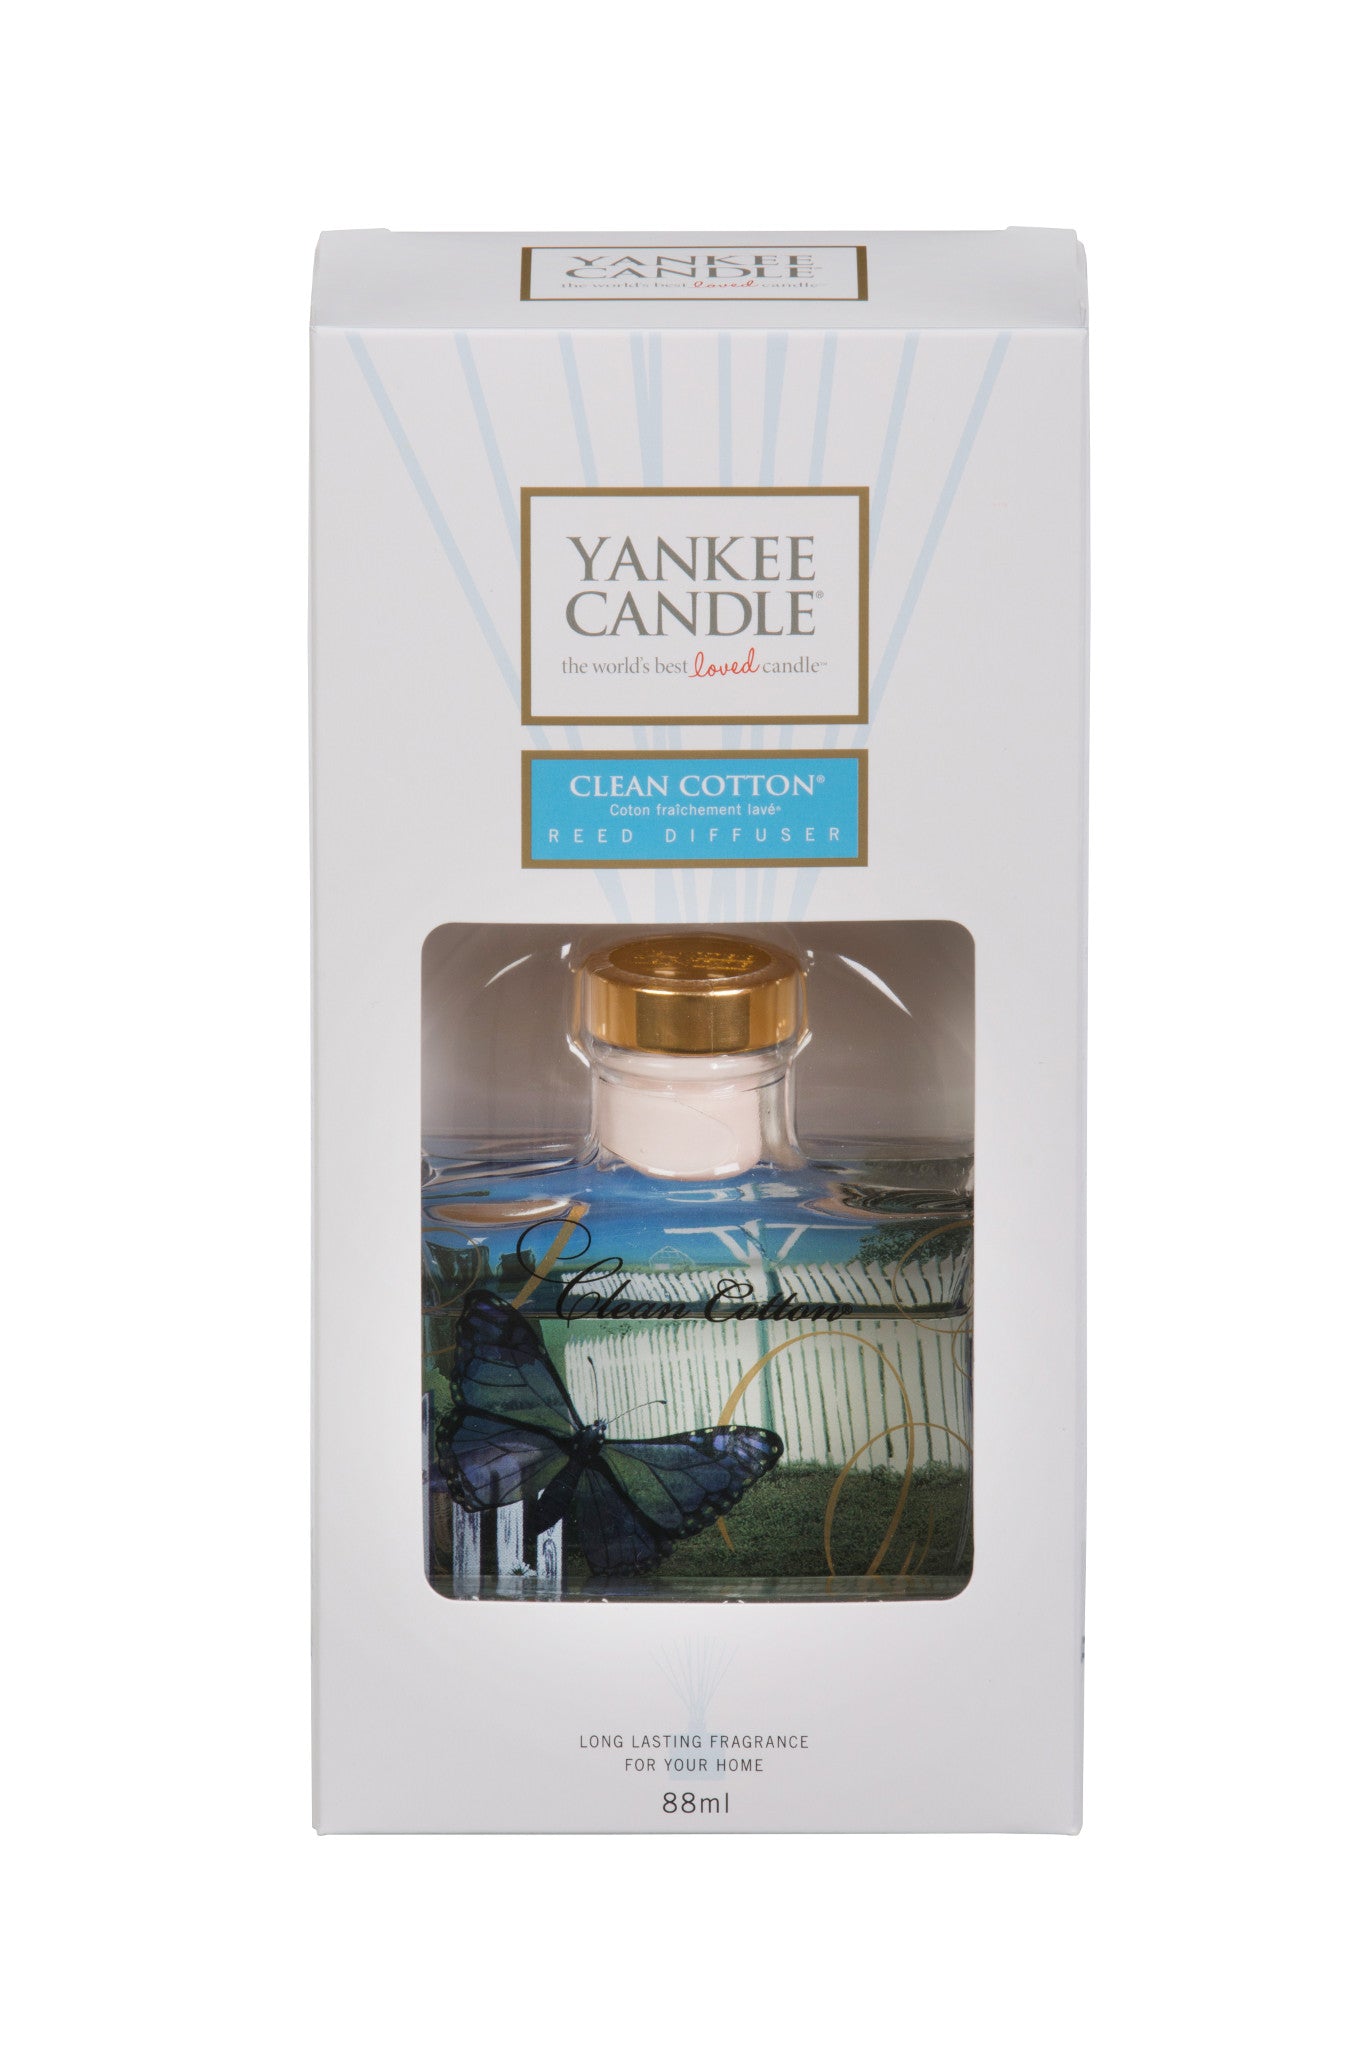 CLEAN COTTON -Yankee Candle- Reed Diffuser